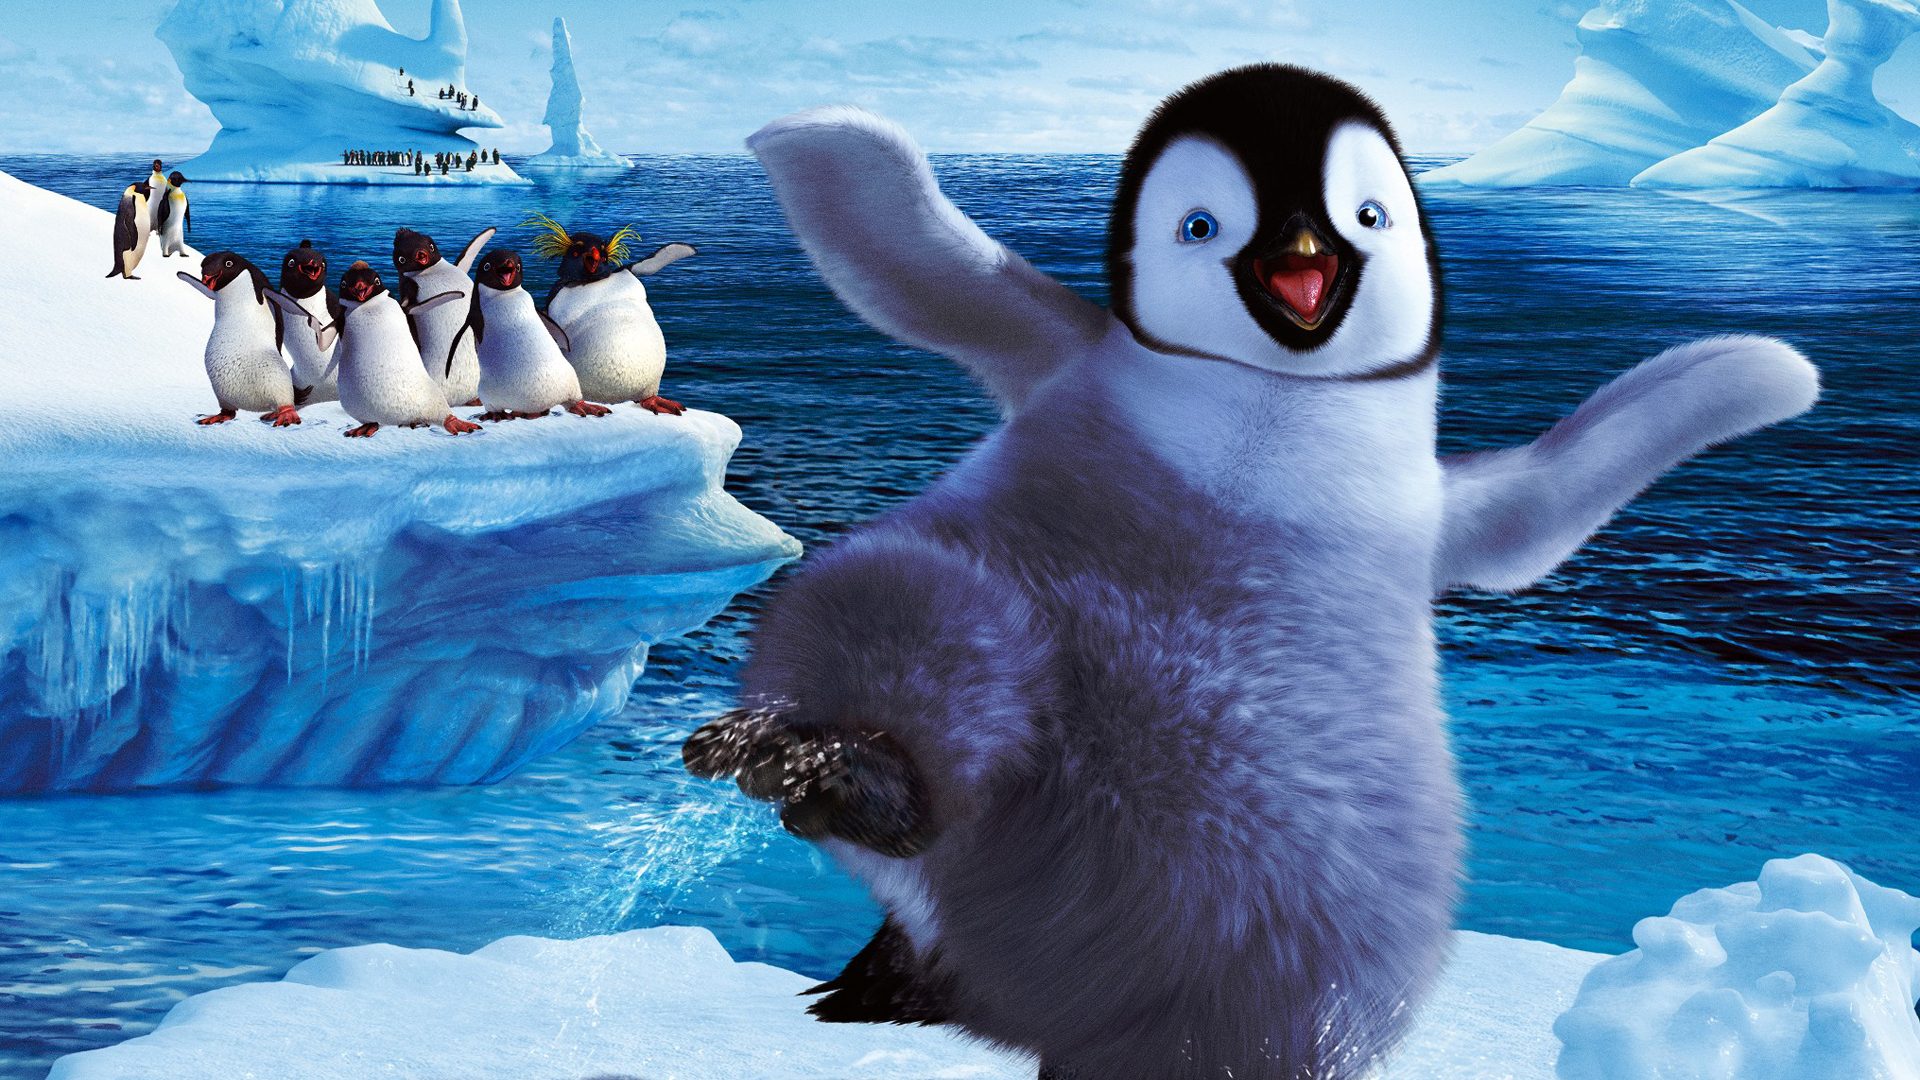 Happy Feet Backgrounds, Compatible - PC, Mobile, Gadgets| 1920x1080 px